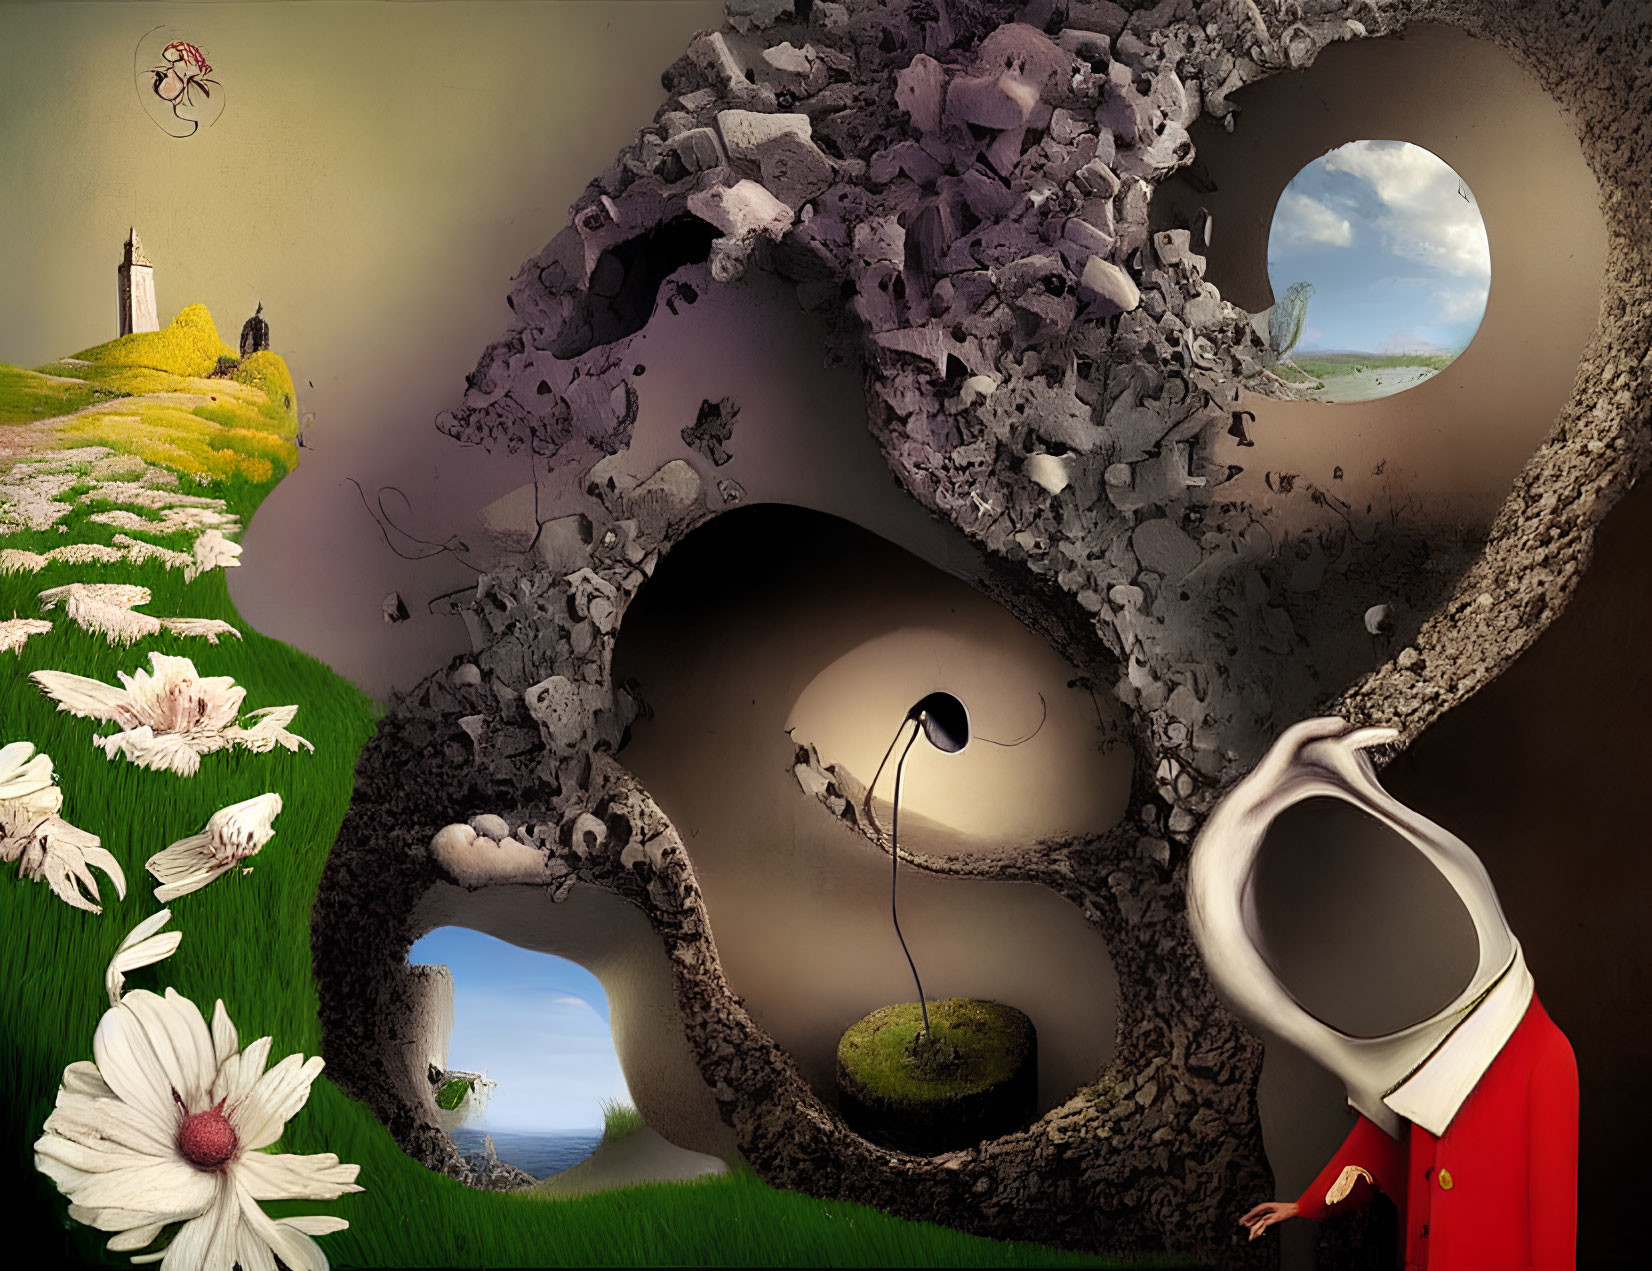 Surreal landscape featuring skull-shaped caves, city ruins, figure in red hood, daisies